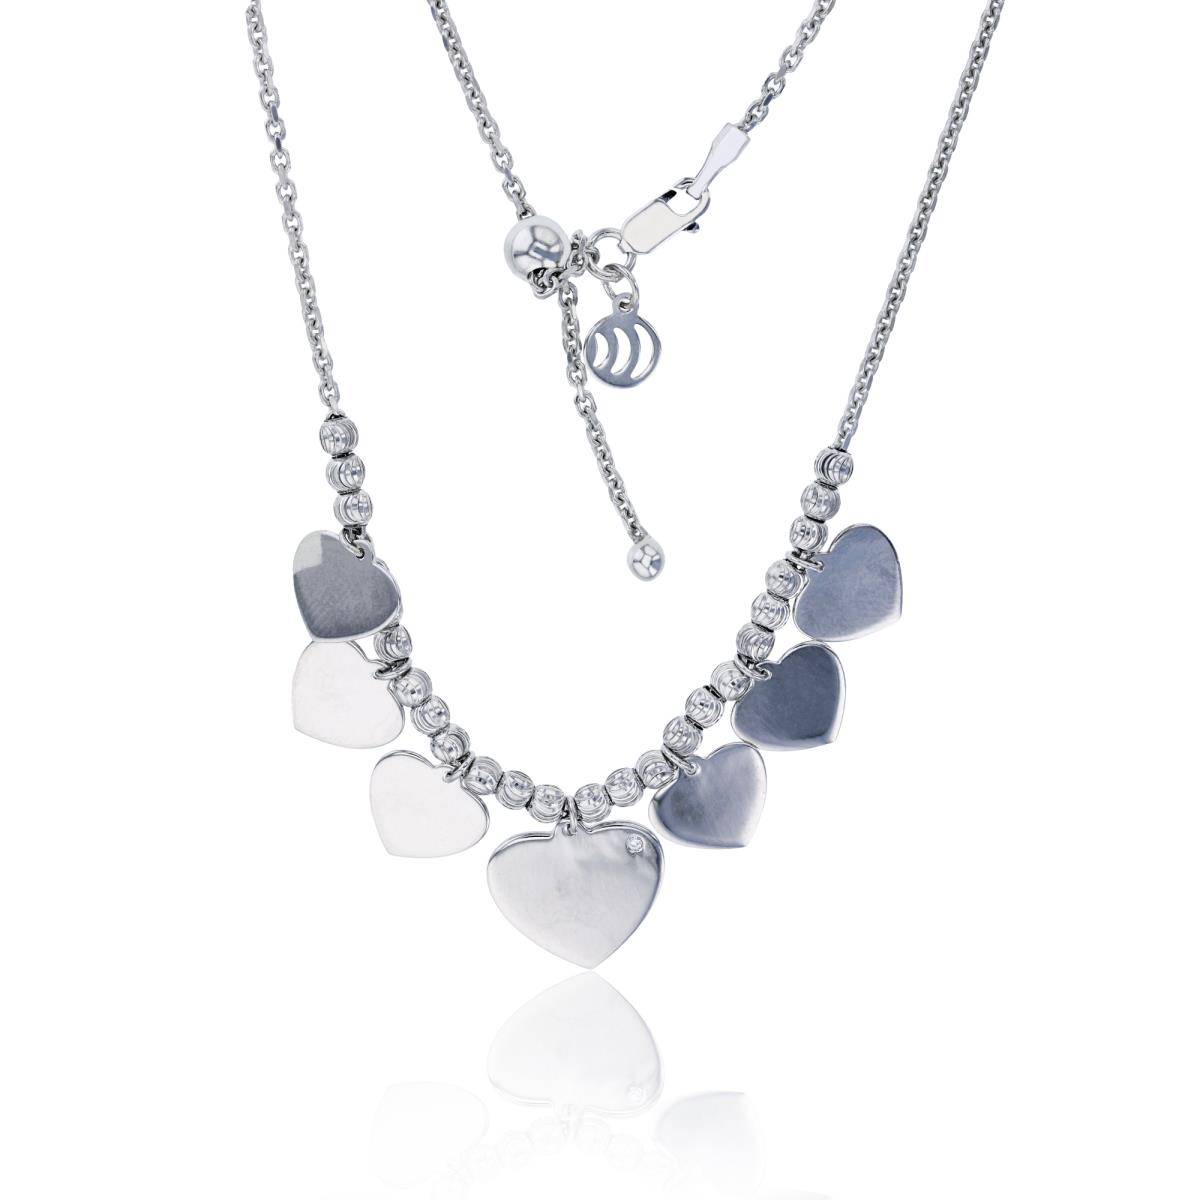 Sterling Silver Rhodium Polished Dangling Hearts with Moon Cut Bead 18" Adjustable Necklace